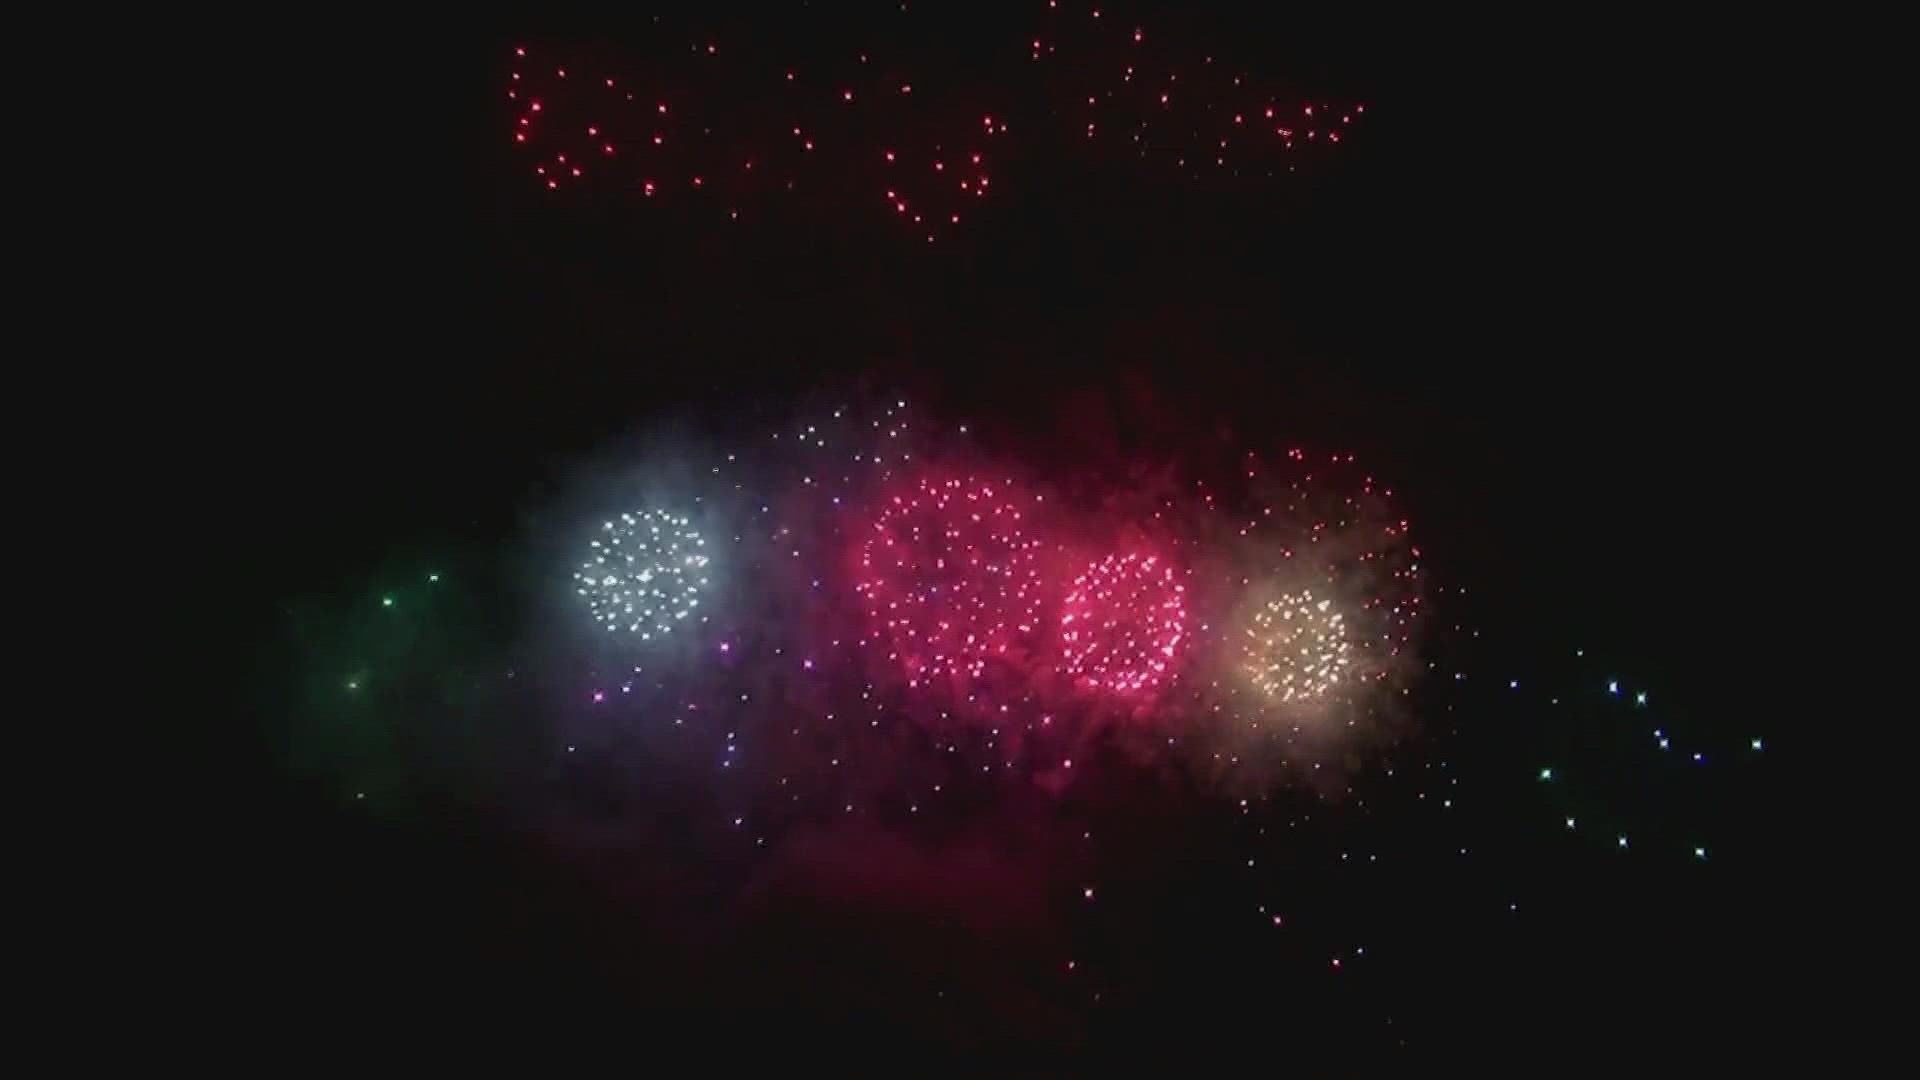 An estimated 16,000 fireworks show will take place across the country. An expert explains the chemistry used to create those lovely light shows.